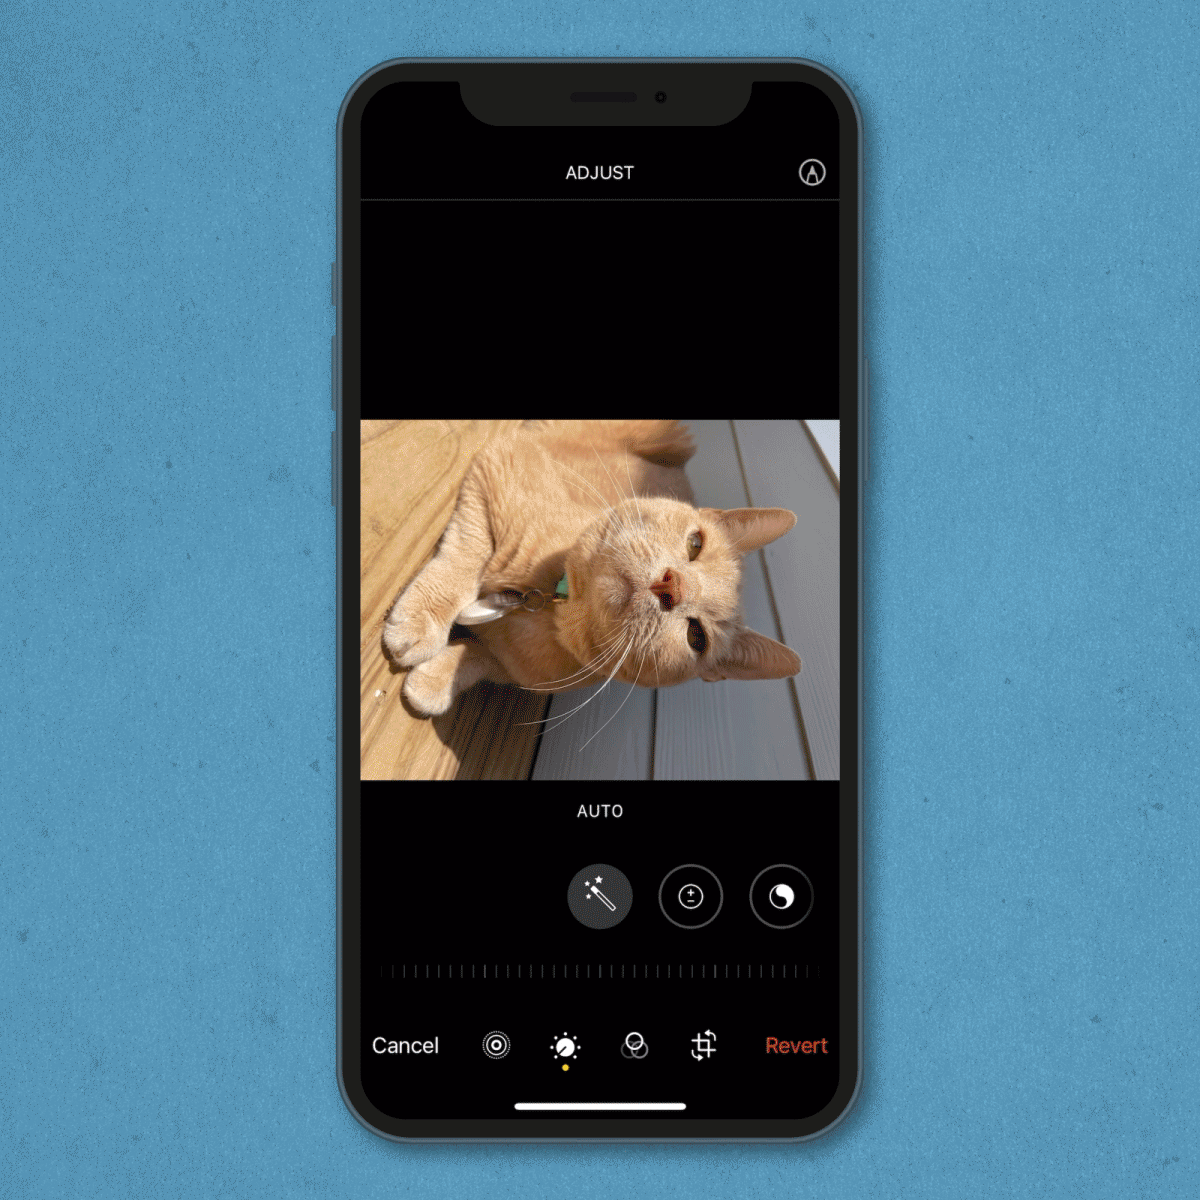 gif showing how to rotate a photo on an iPhone